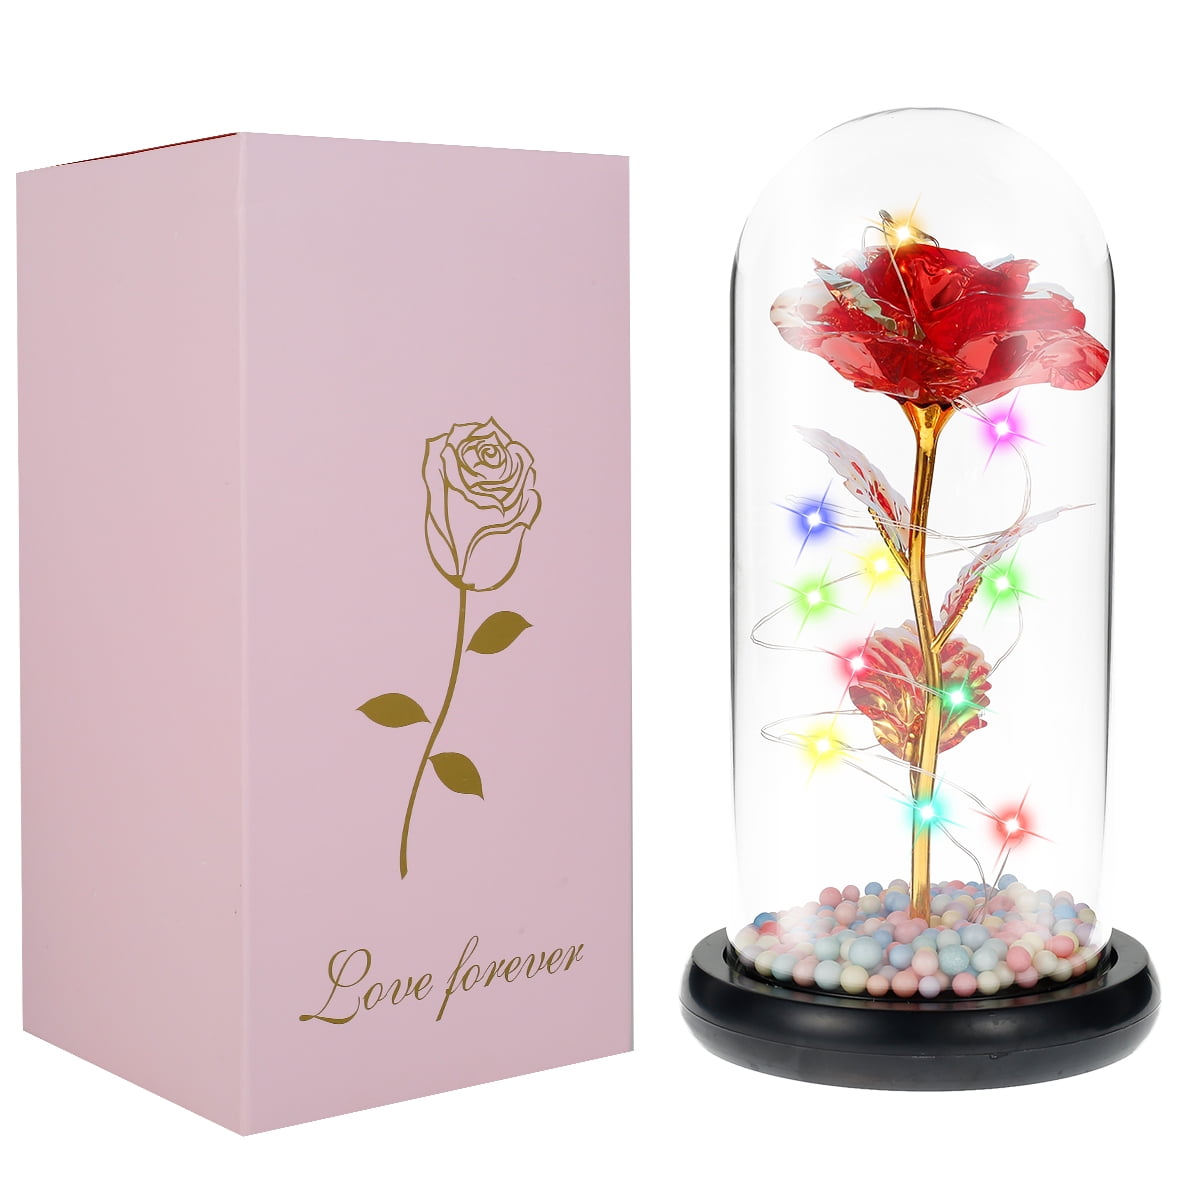 Enchanted Rose Forever blooming In Glass With LED Light Wedding Home Xmas Decor 